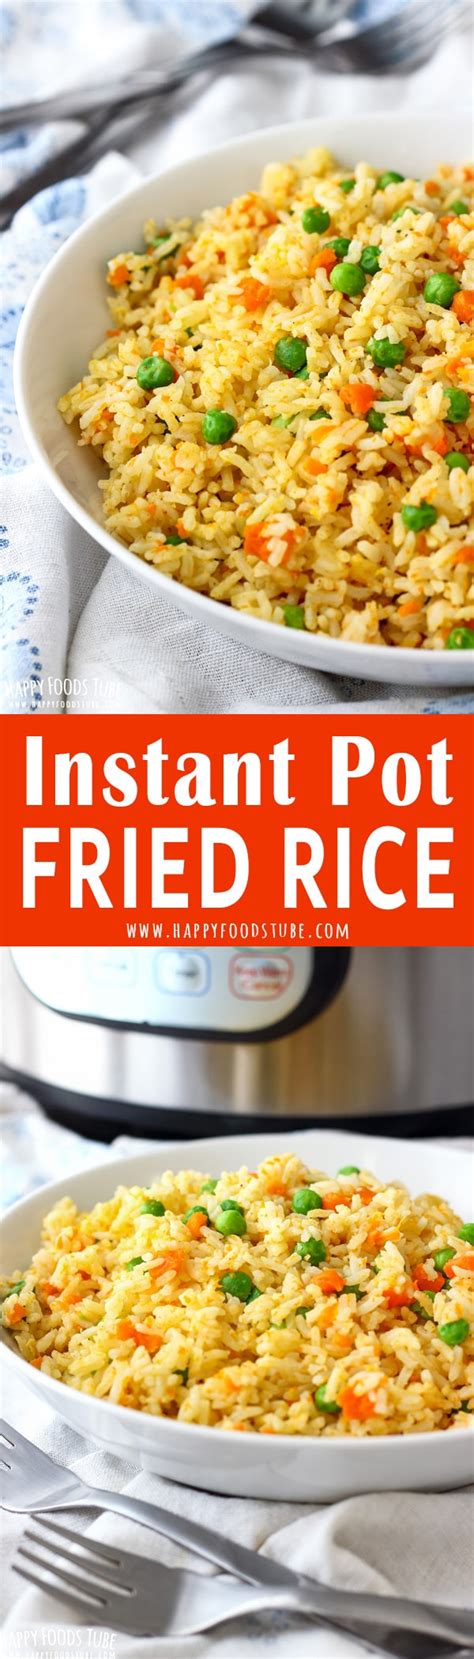 Add rinsed and drained rice and saute for about 20 seconds and then stir in chicken stock and ground black pepper. Instant Pot Fried Rice - Pressure Cooker Fried Rice